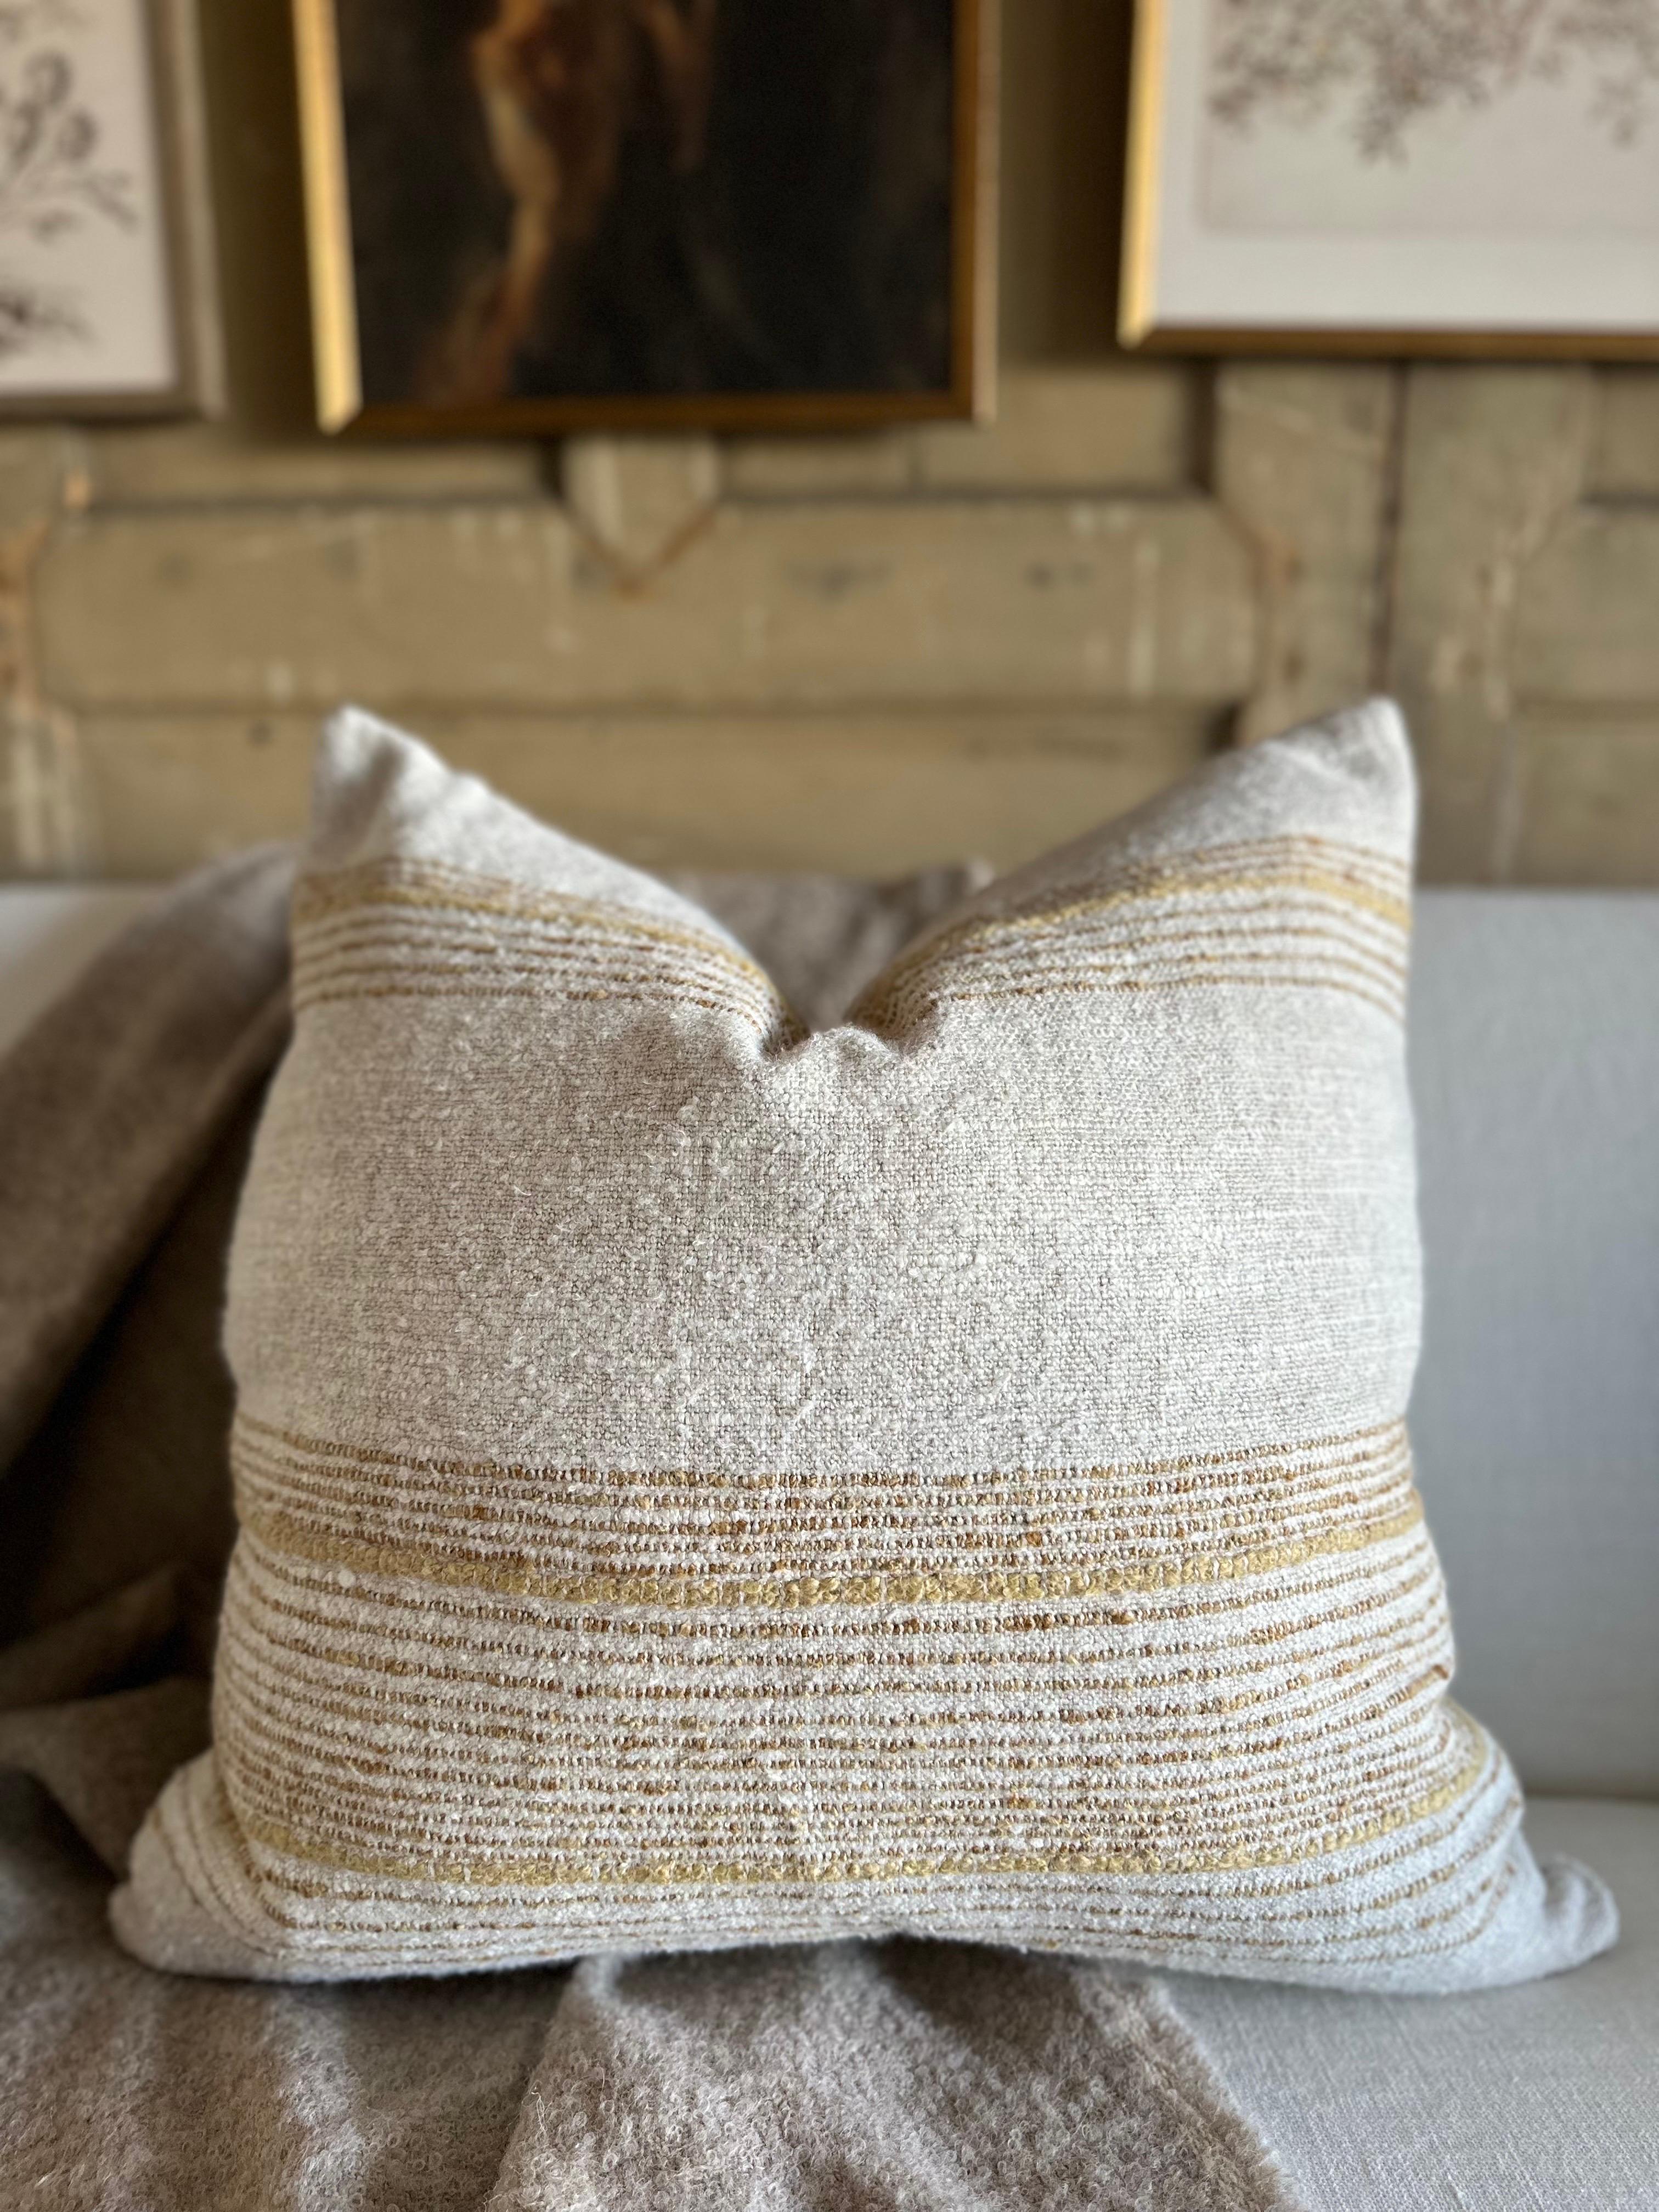 Hand Woven Wool and linen Accent Pillow
Extremely soft to the hand, this beautiful natural colored nubby woven style accent pillow is a perfect accent to your space.
Includes Down/Feather insert
Size: 23